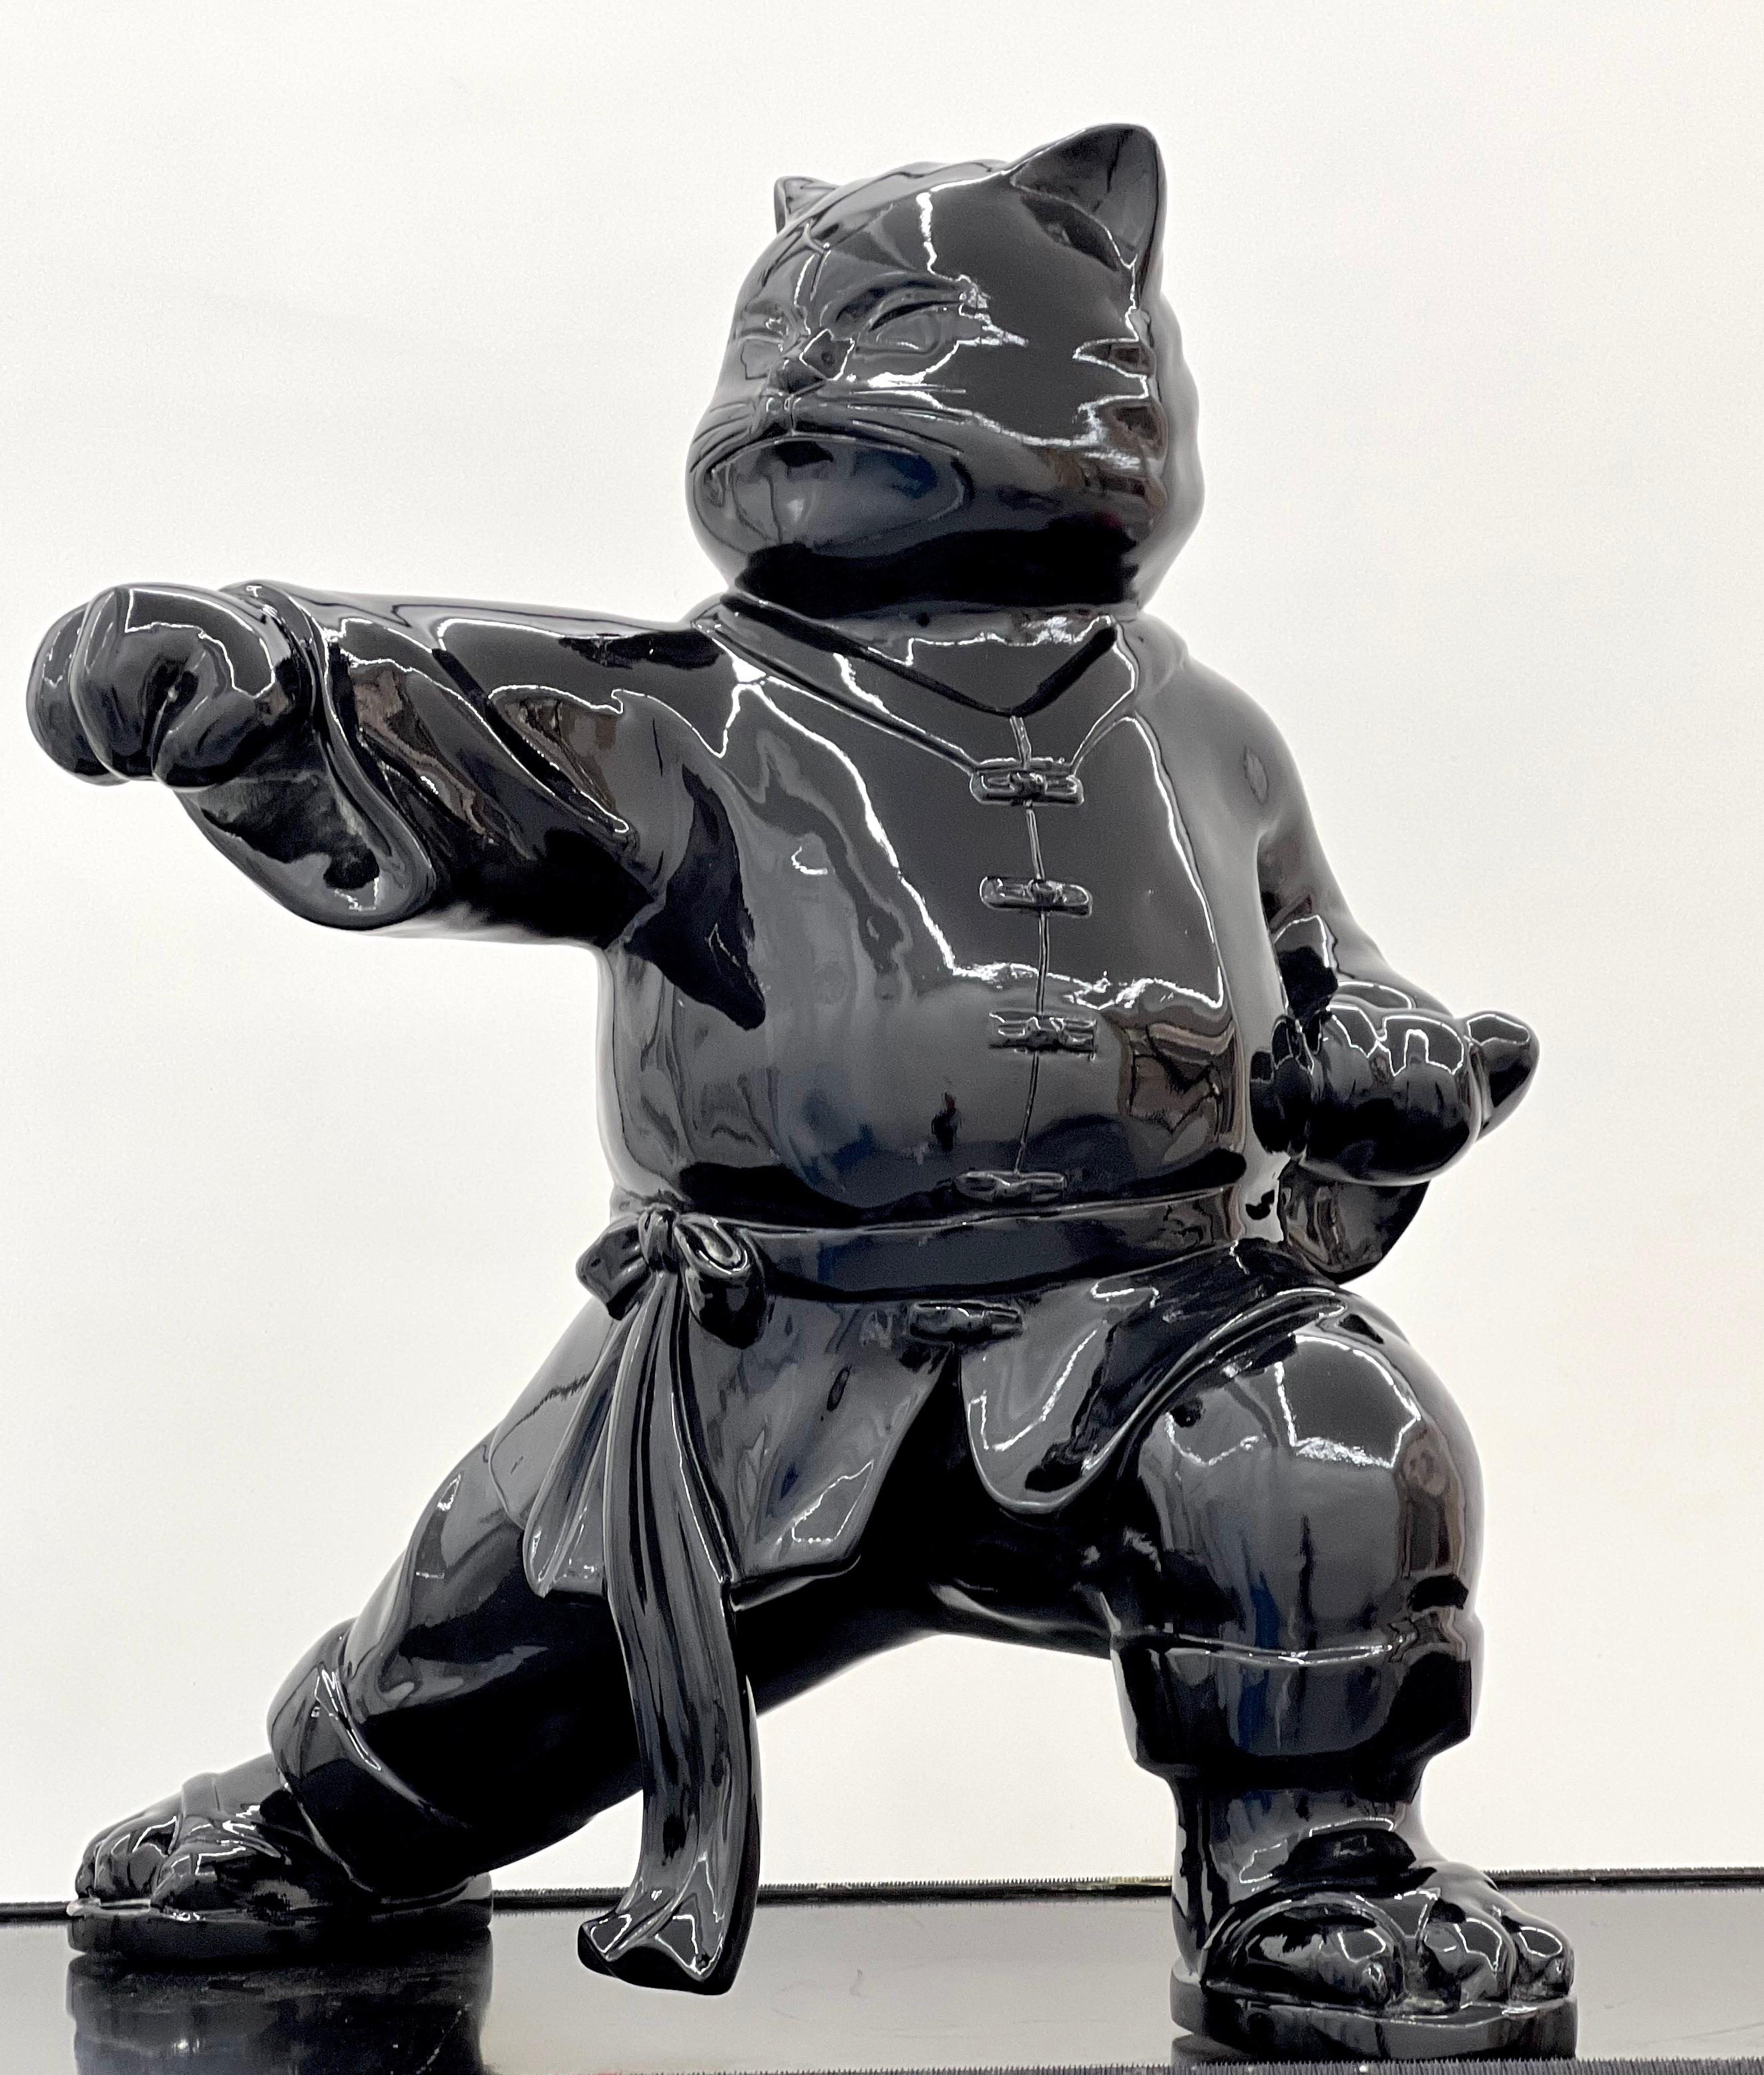 The Elegance of Kungfucat : Black Cat Fu Symphony - Contemporary Sculpture by HIRO ANDO